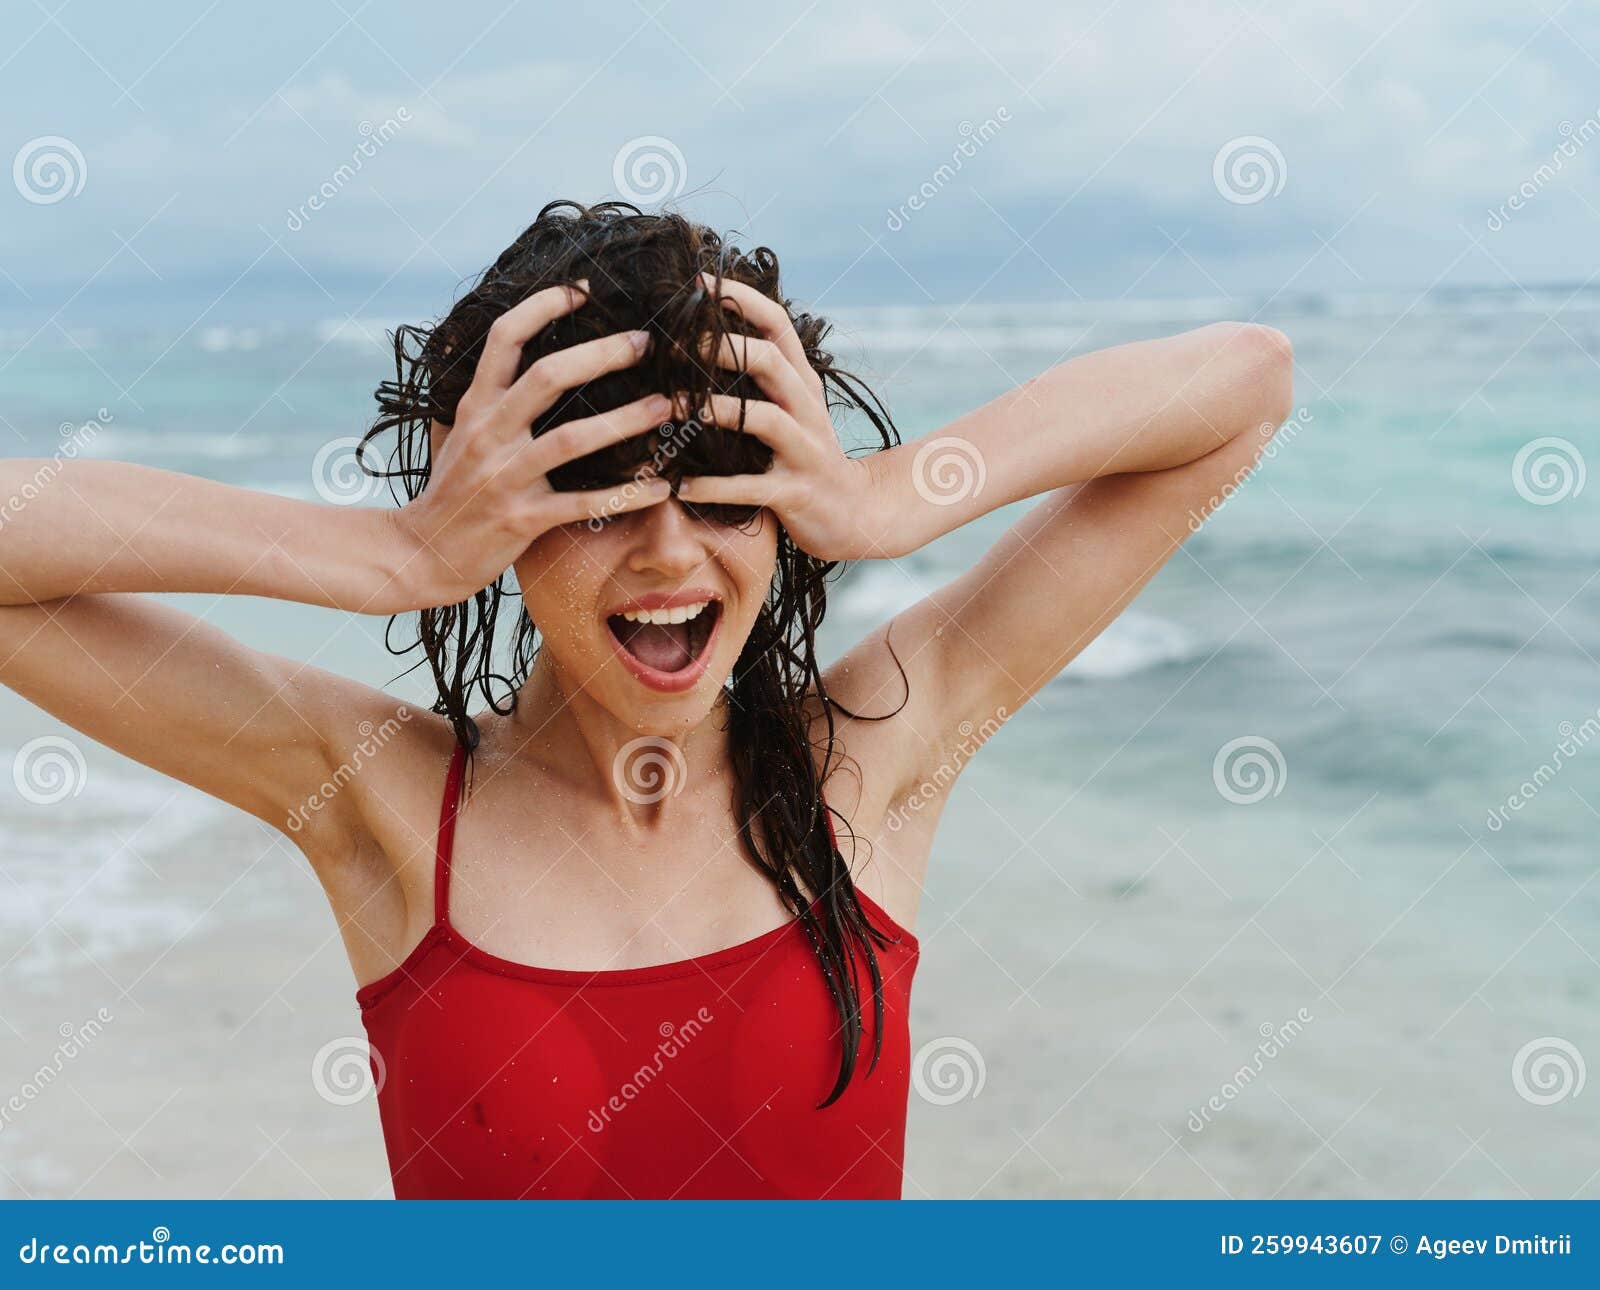 A Woman With Wet Hair Shouts Sadly Stock Image Image Of Vacation Depilation 259943607